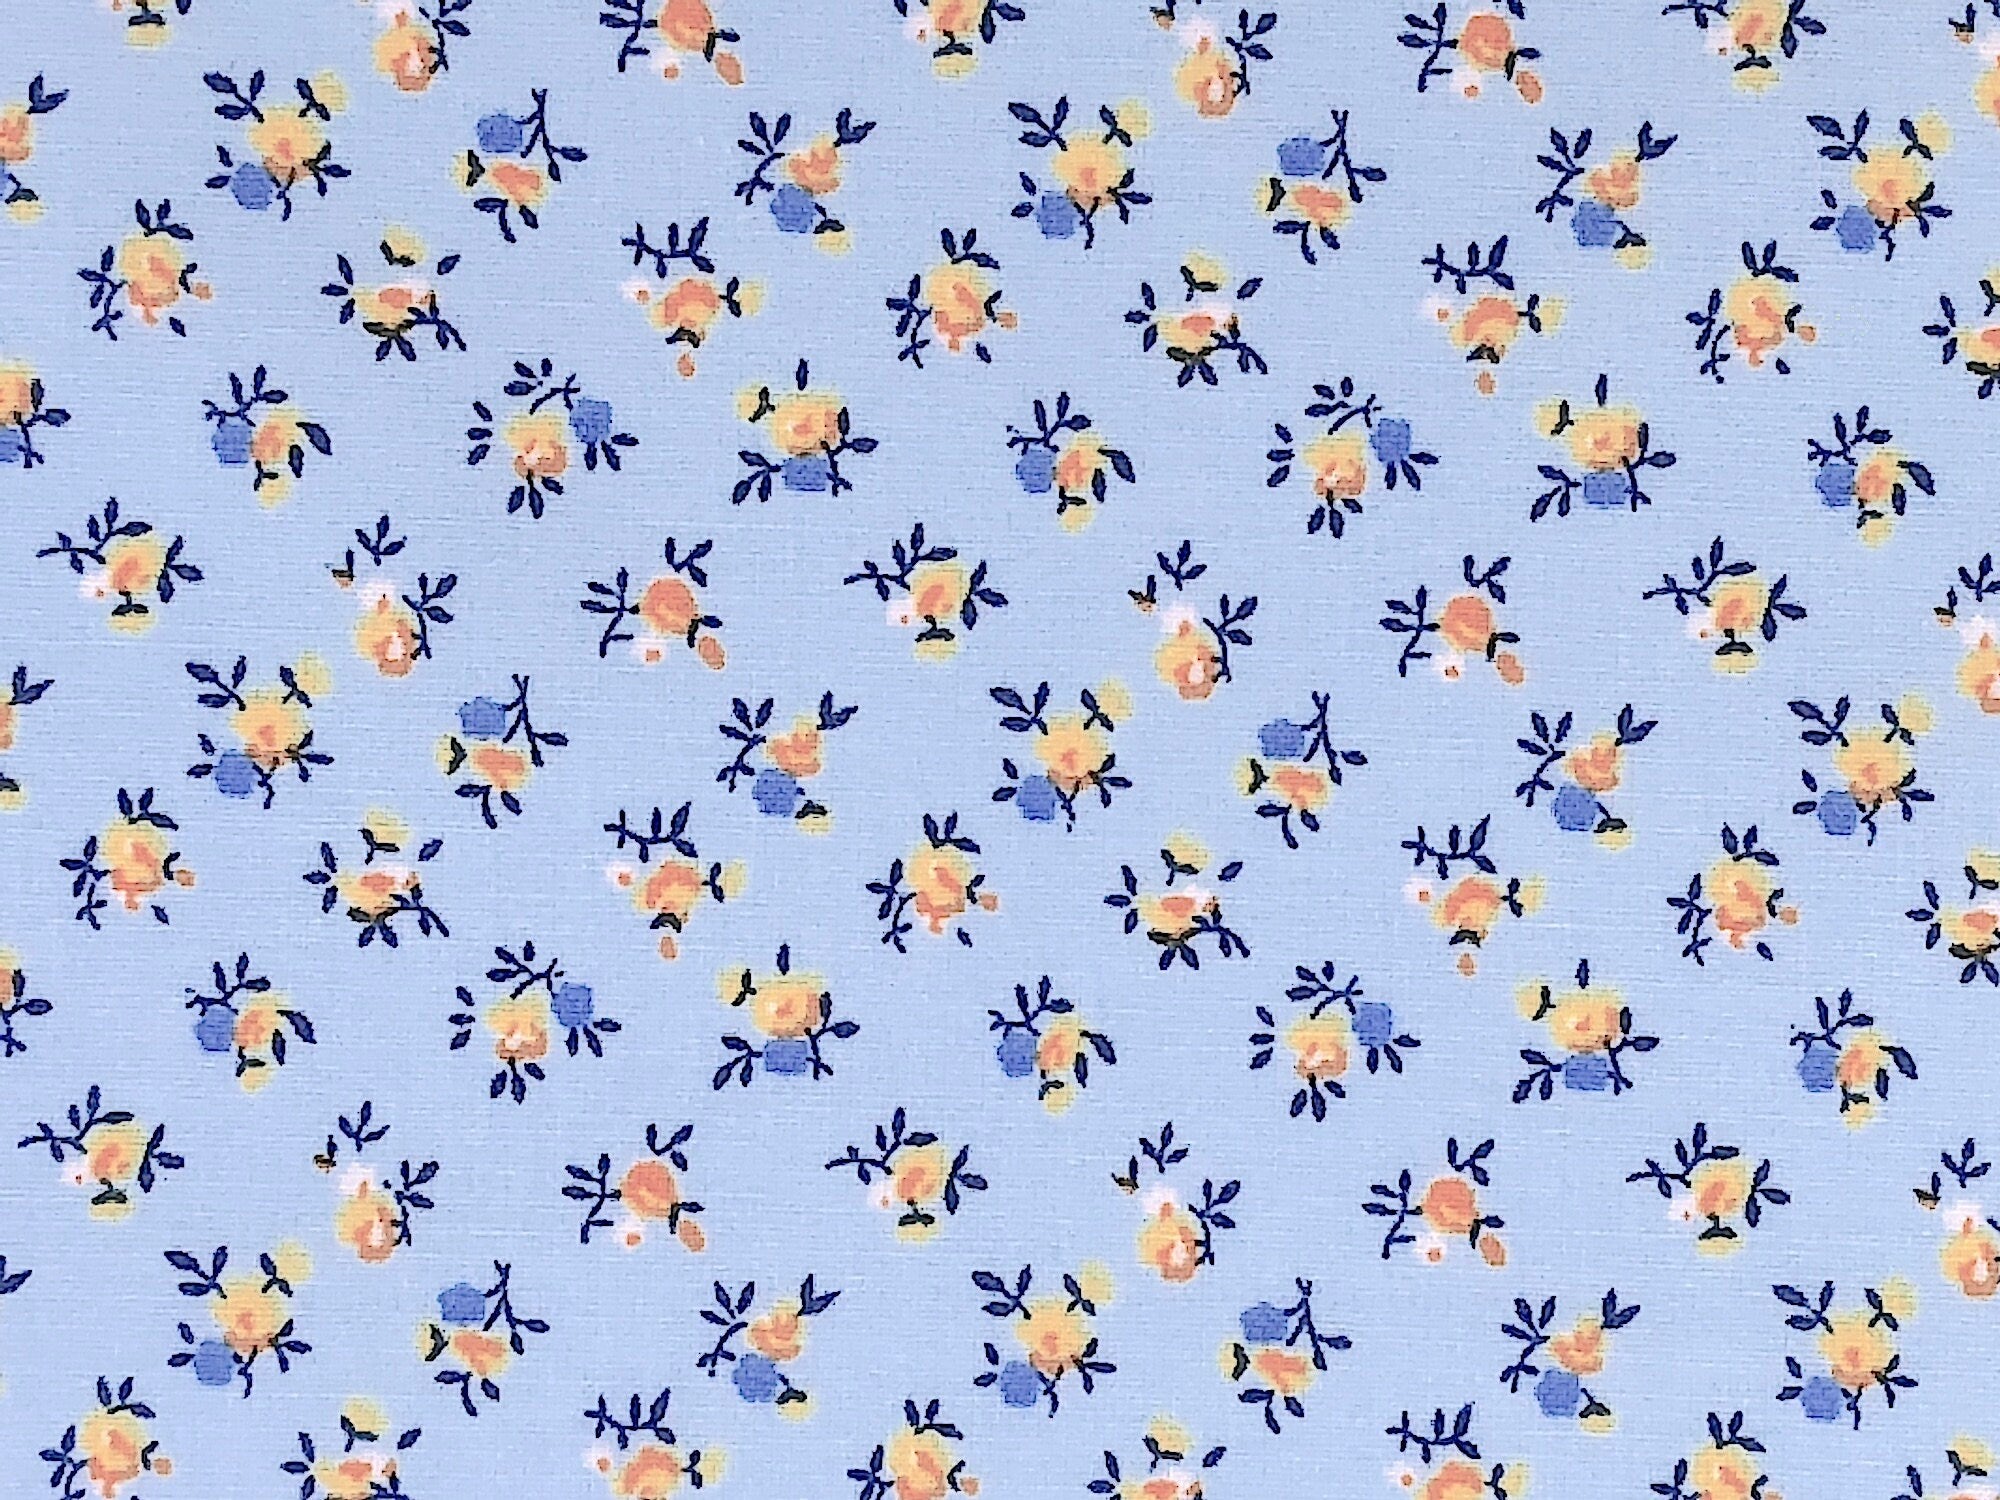 This light blue fabric is covered with small yellow flowers